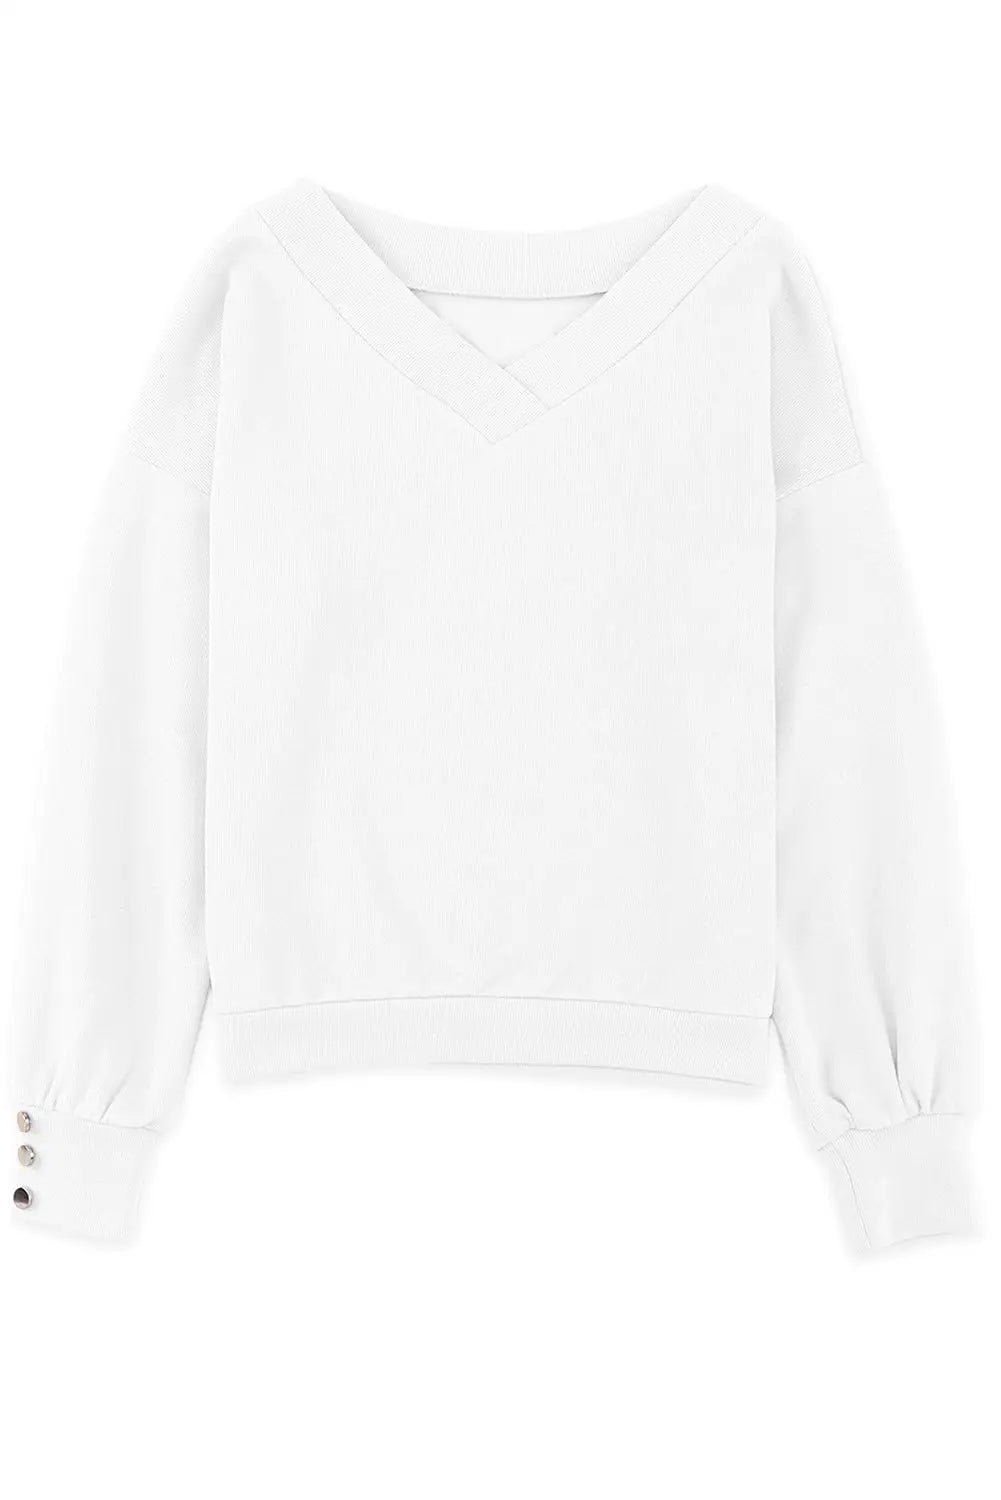 White knitted v neck buttoned cuffs sweater - tops